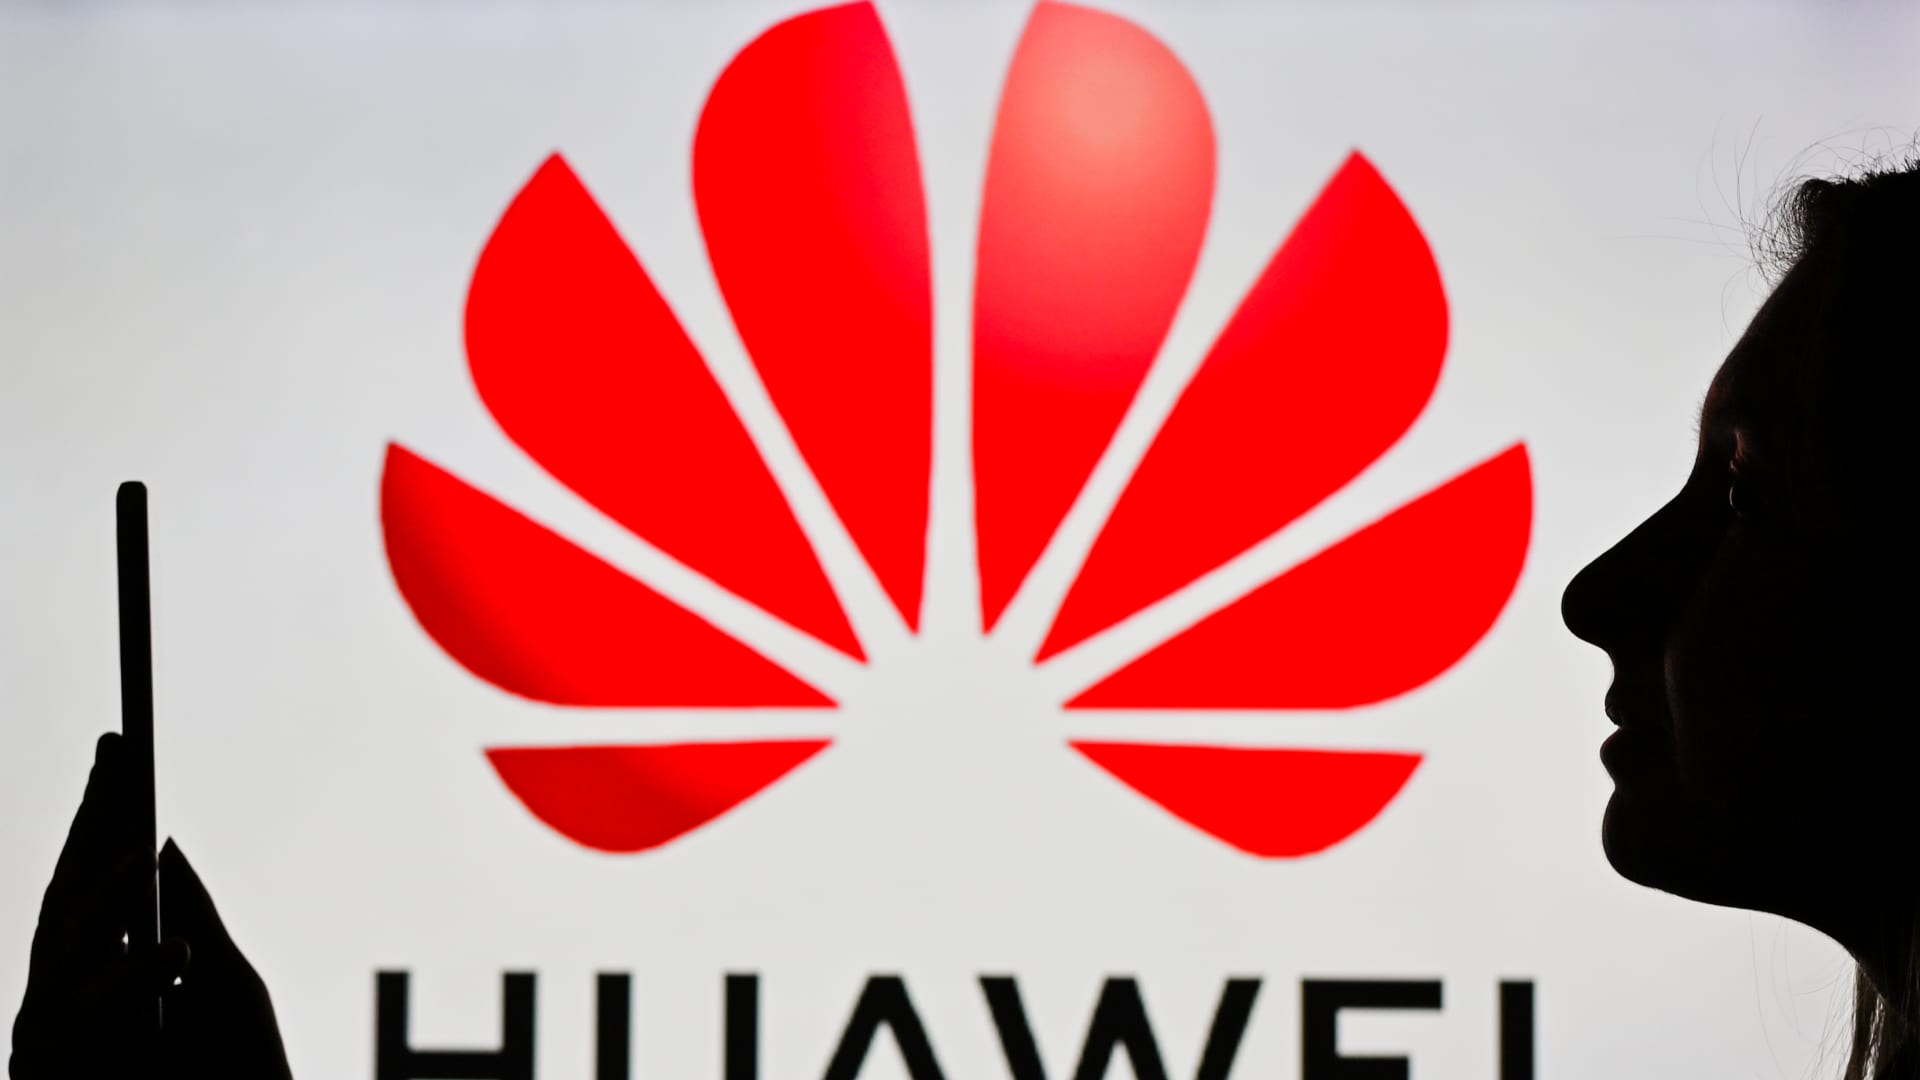 UK gives telco firms more time to remove Huawei 5G equipment